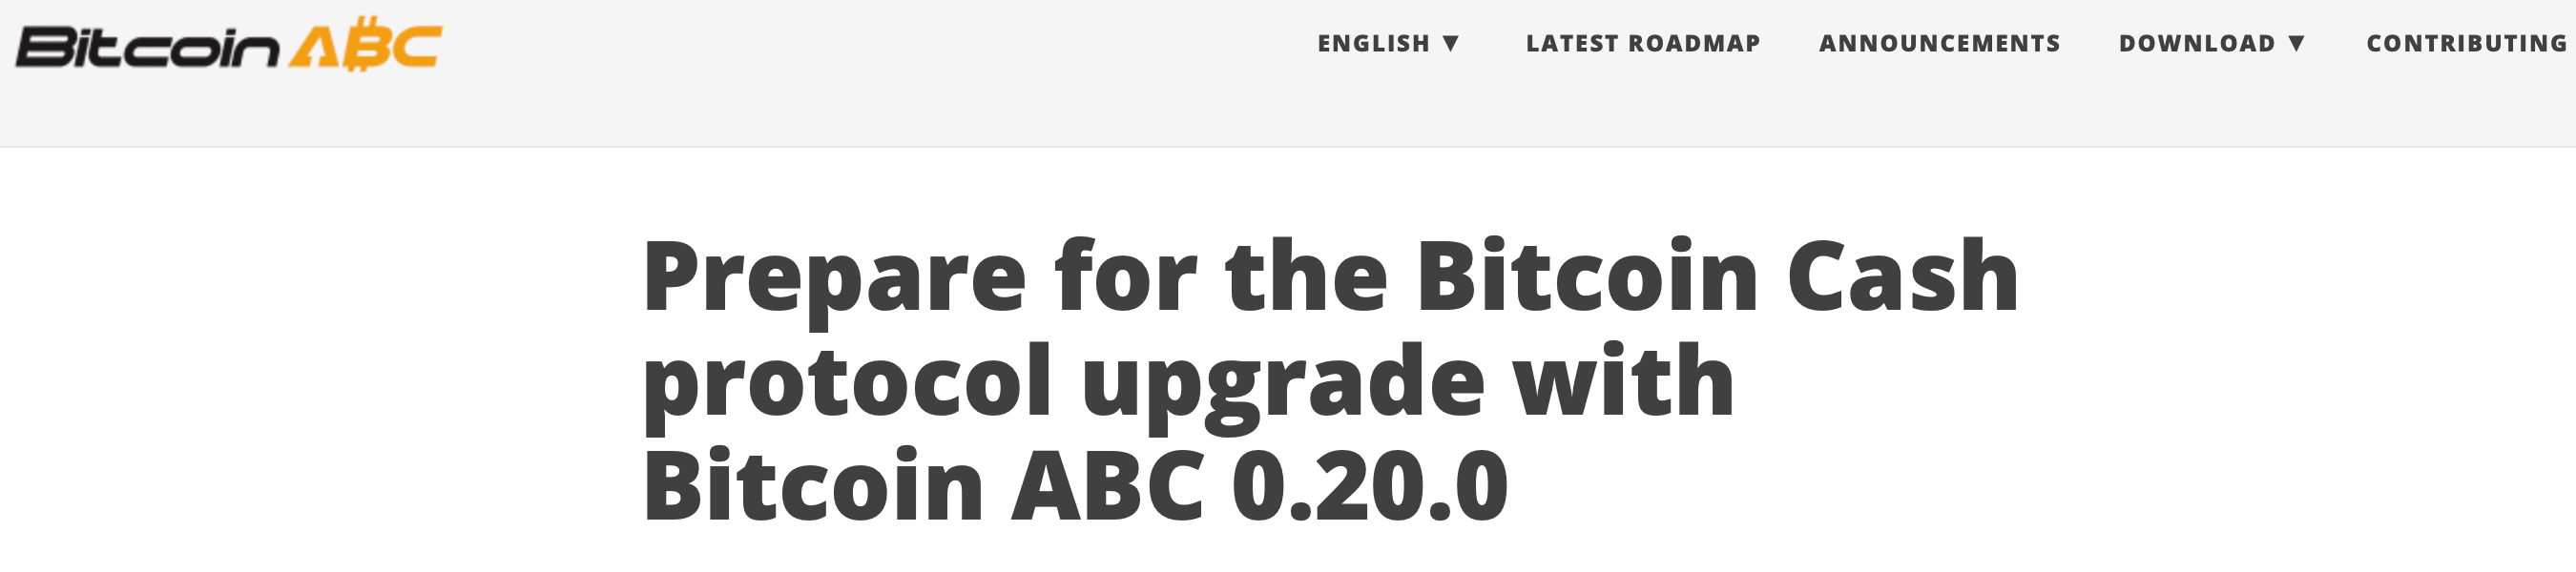 Bitcoin Cash Proponents Prepare for Forthcoming Upgrade Features